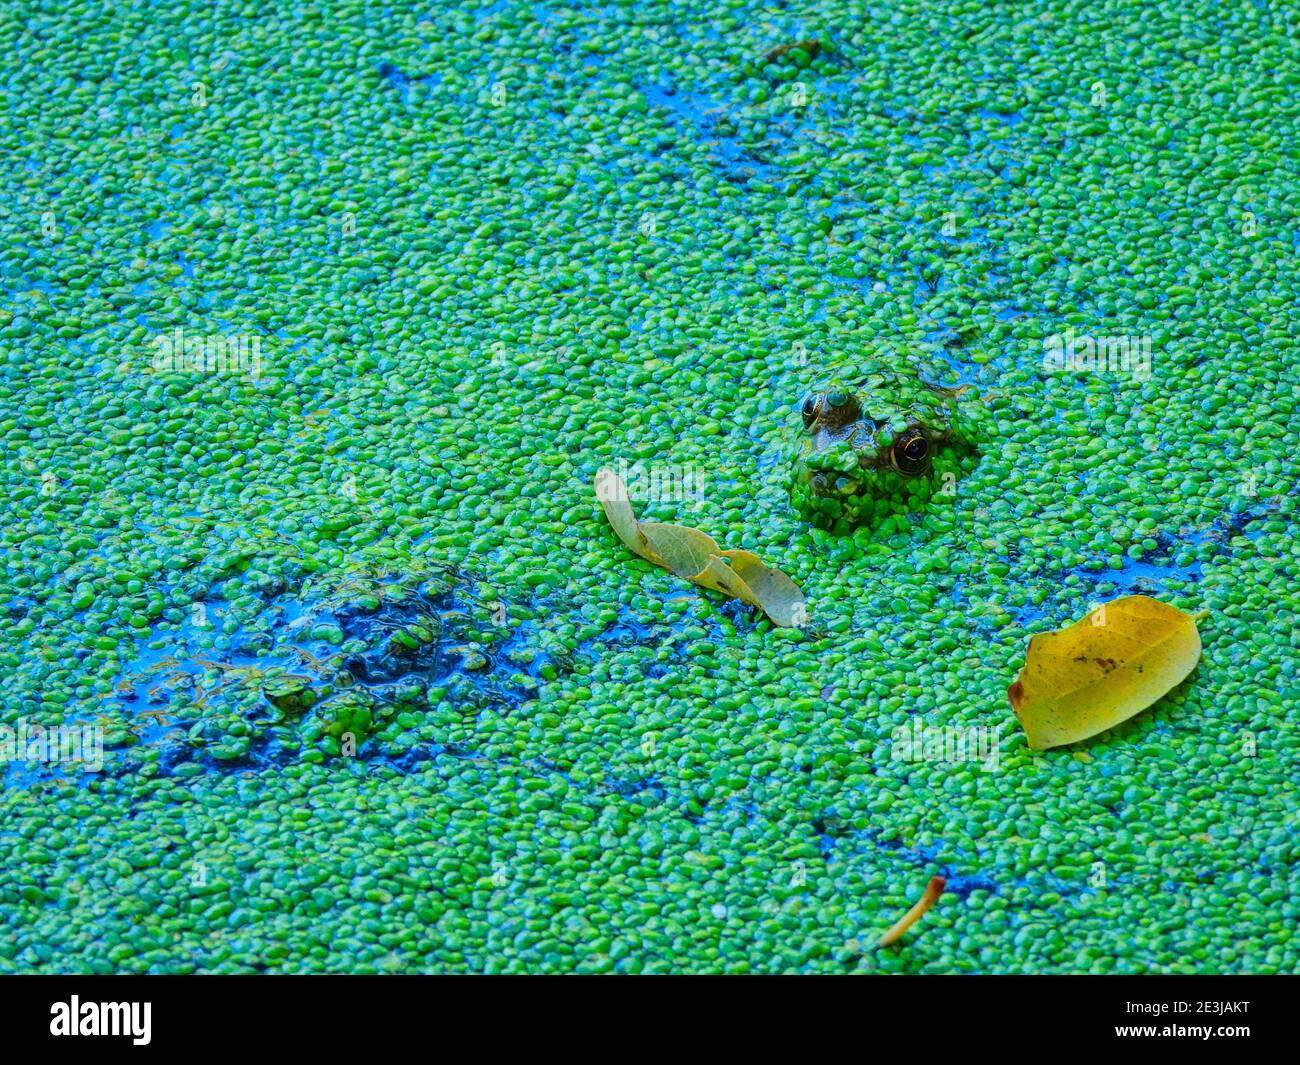 Frog in a pond: A bullfrog sits in a shallow pond filled with a duckweed growth on the surface while its eyes, nose and ears are visible Stock Photo